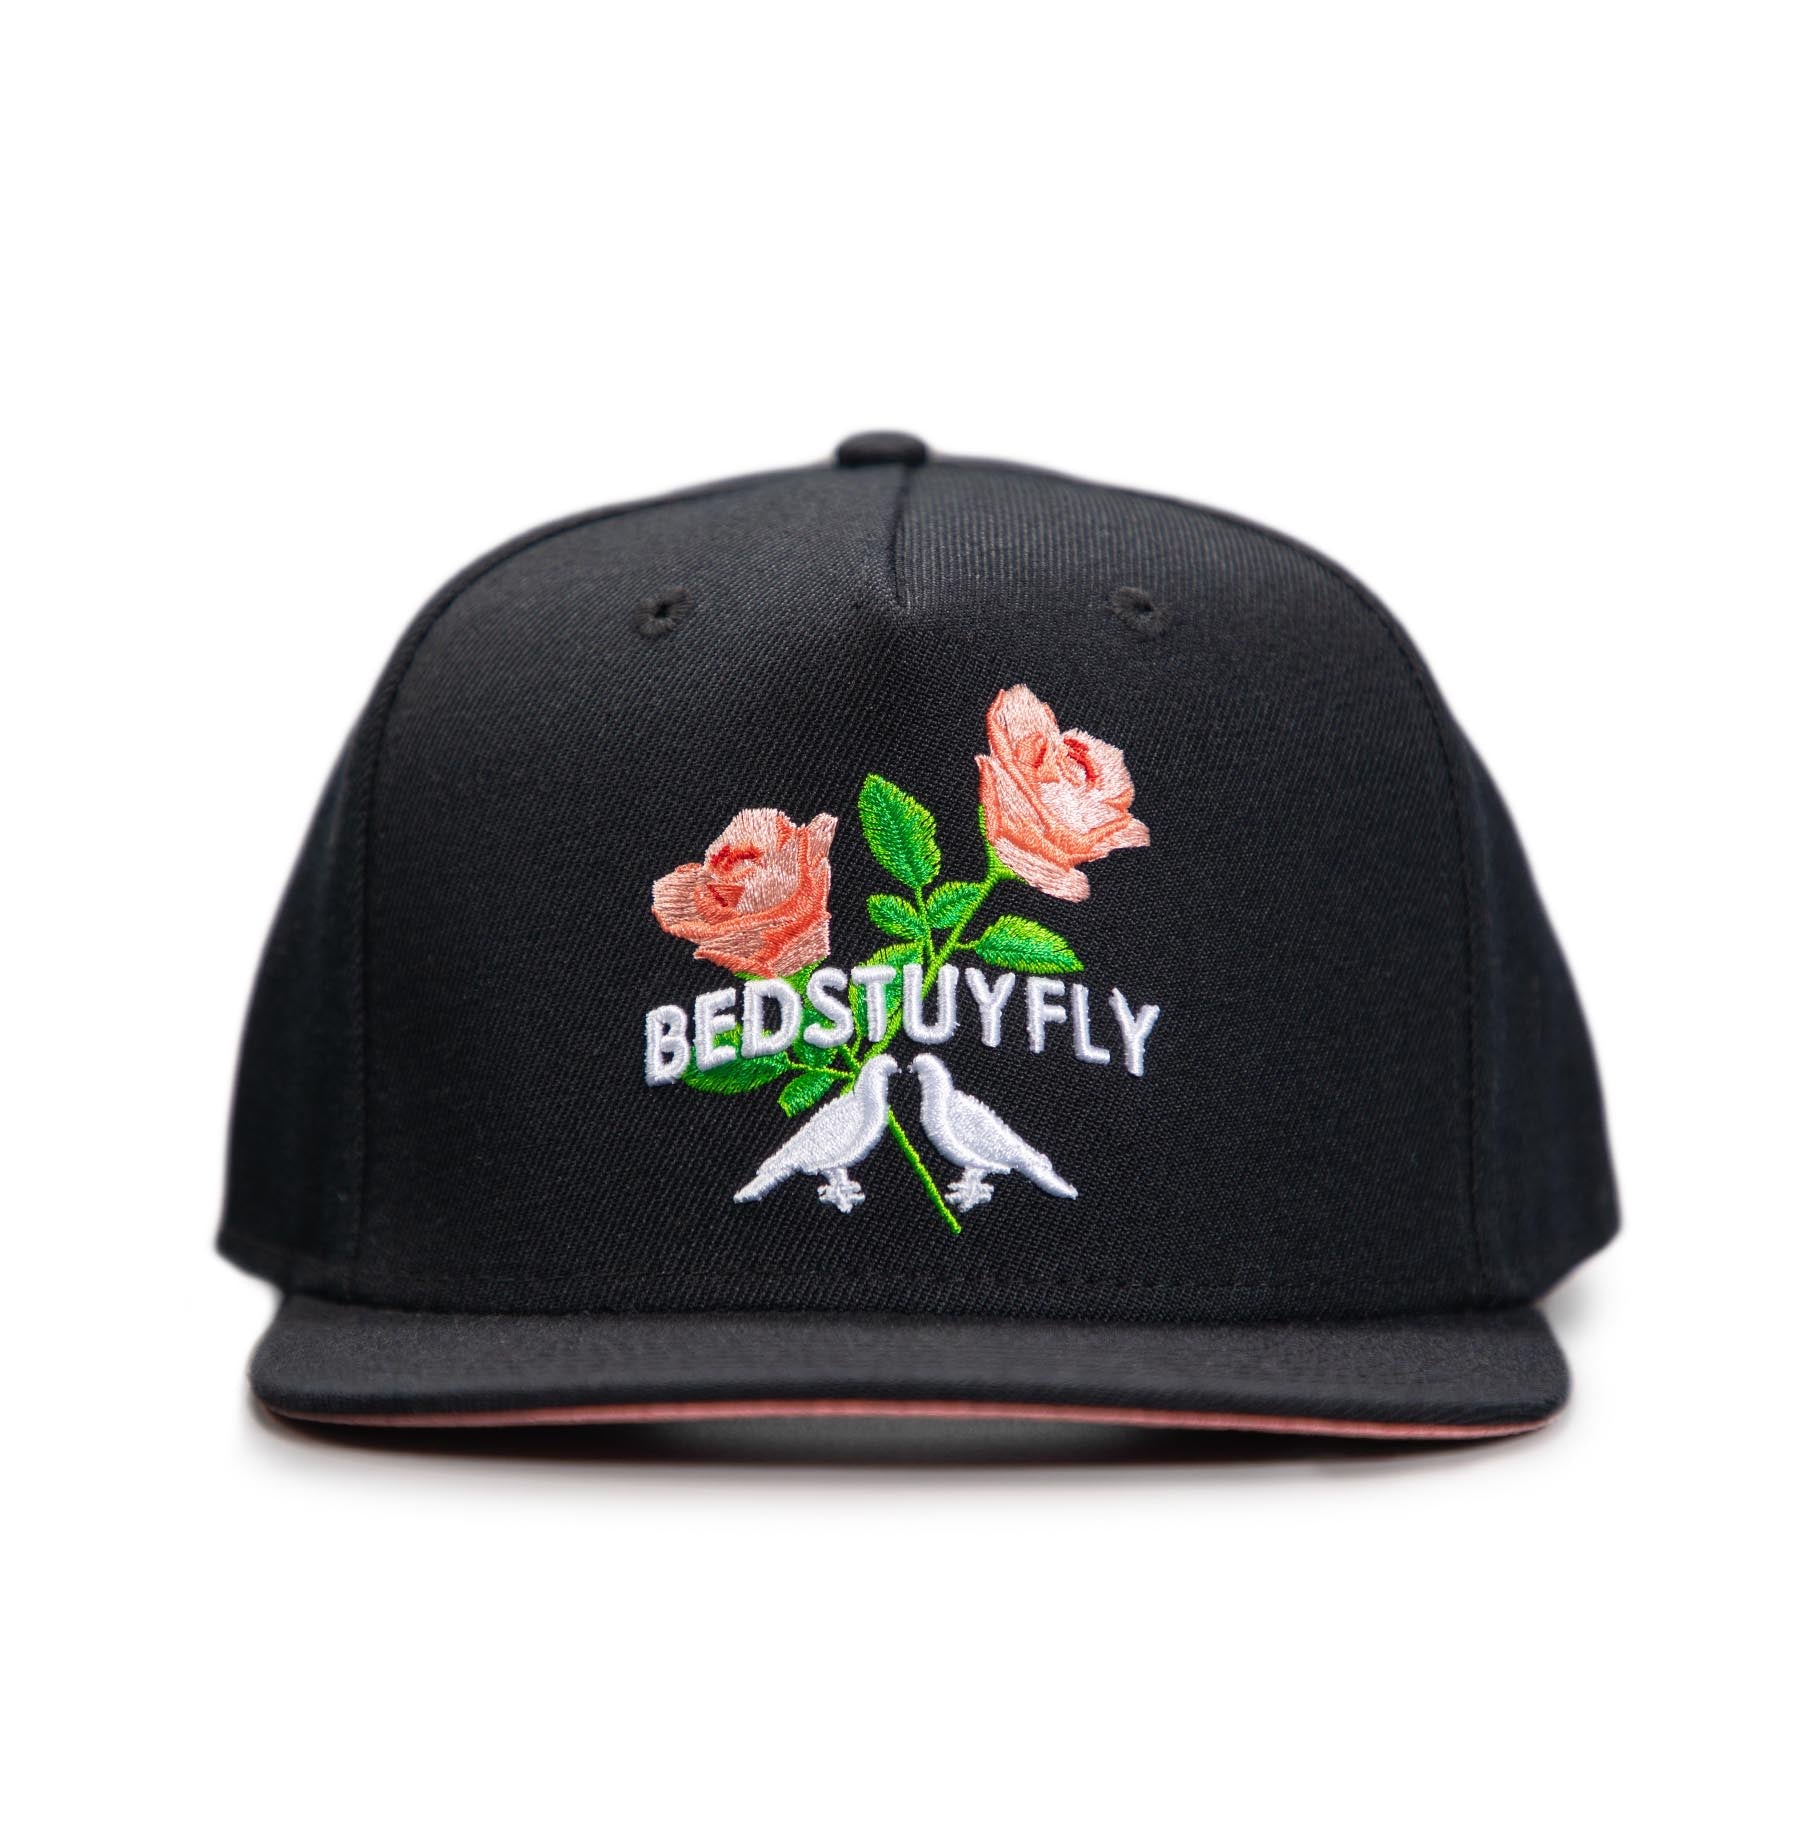 Give’m Roses Cap - Bedstuyfly